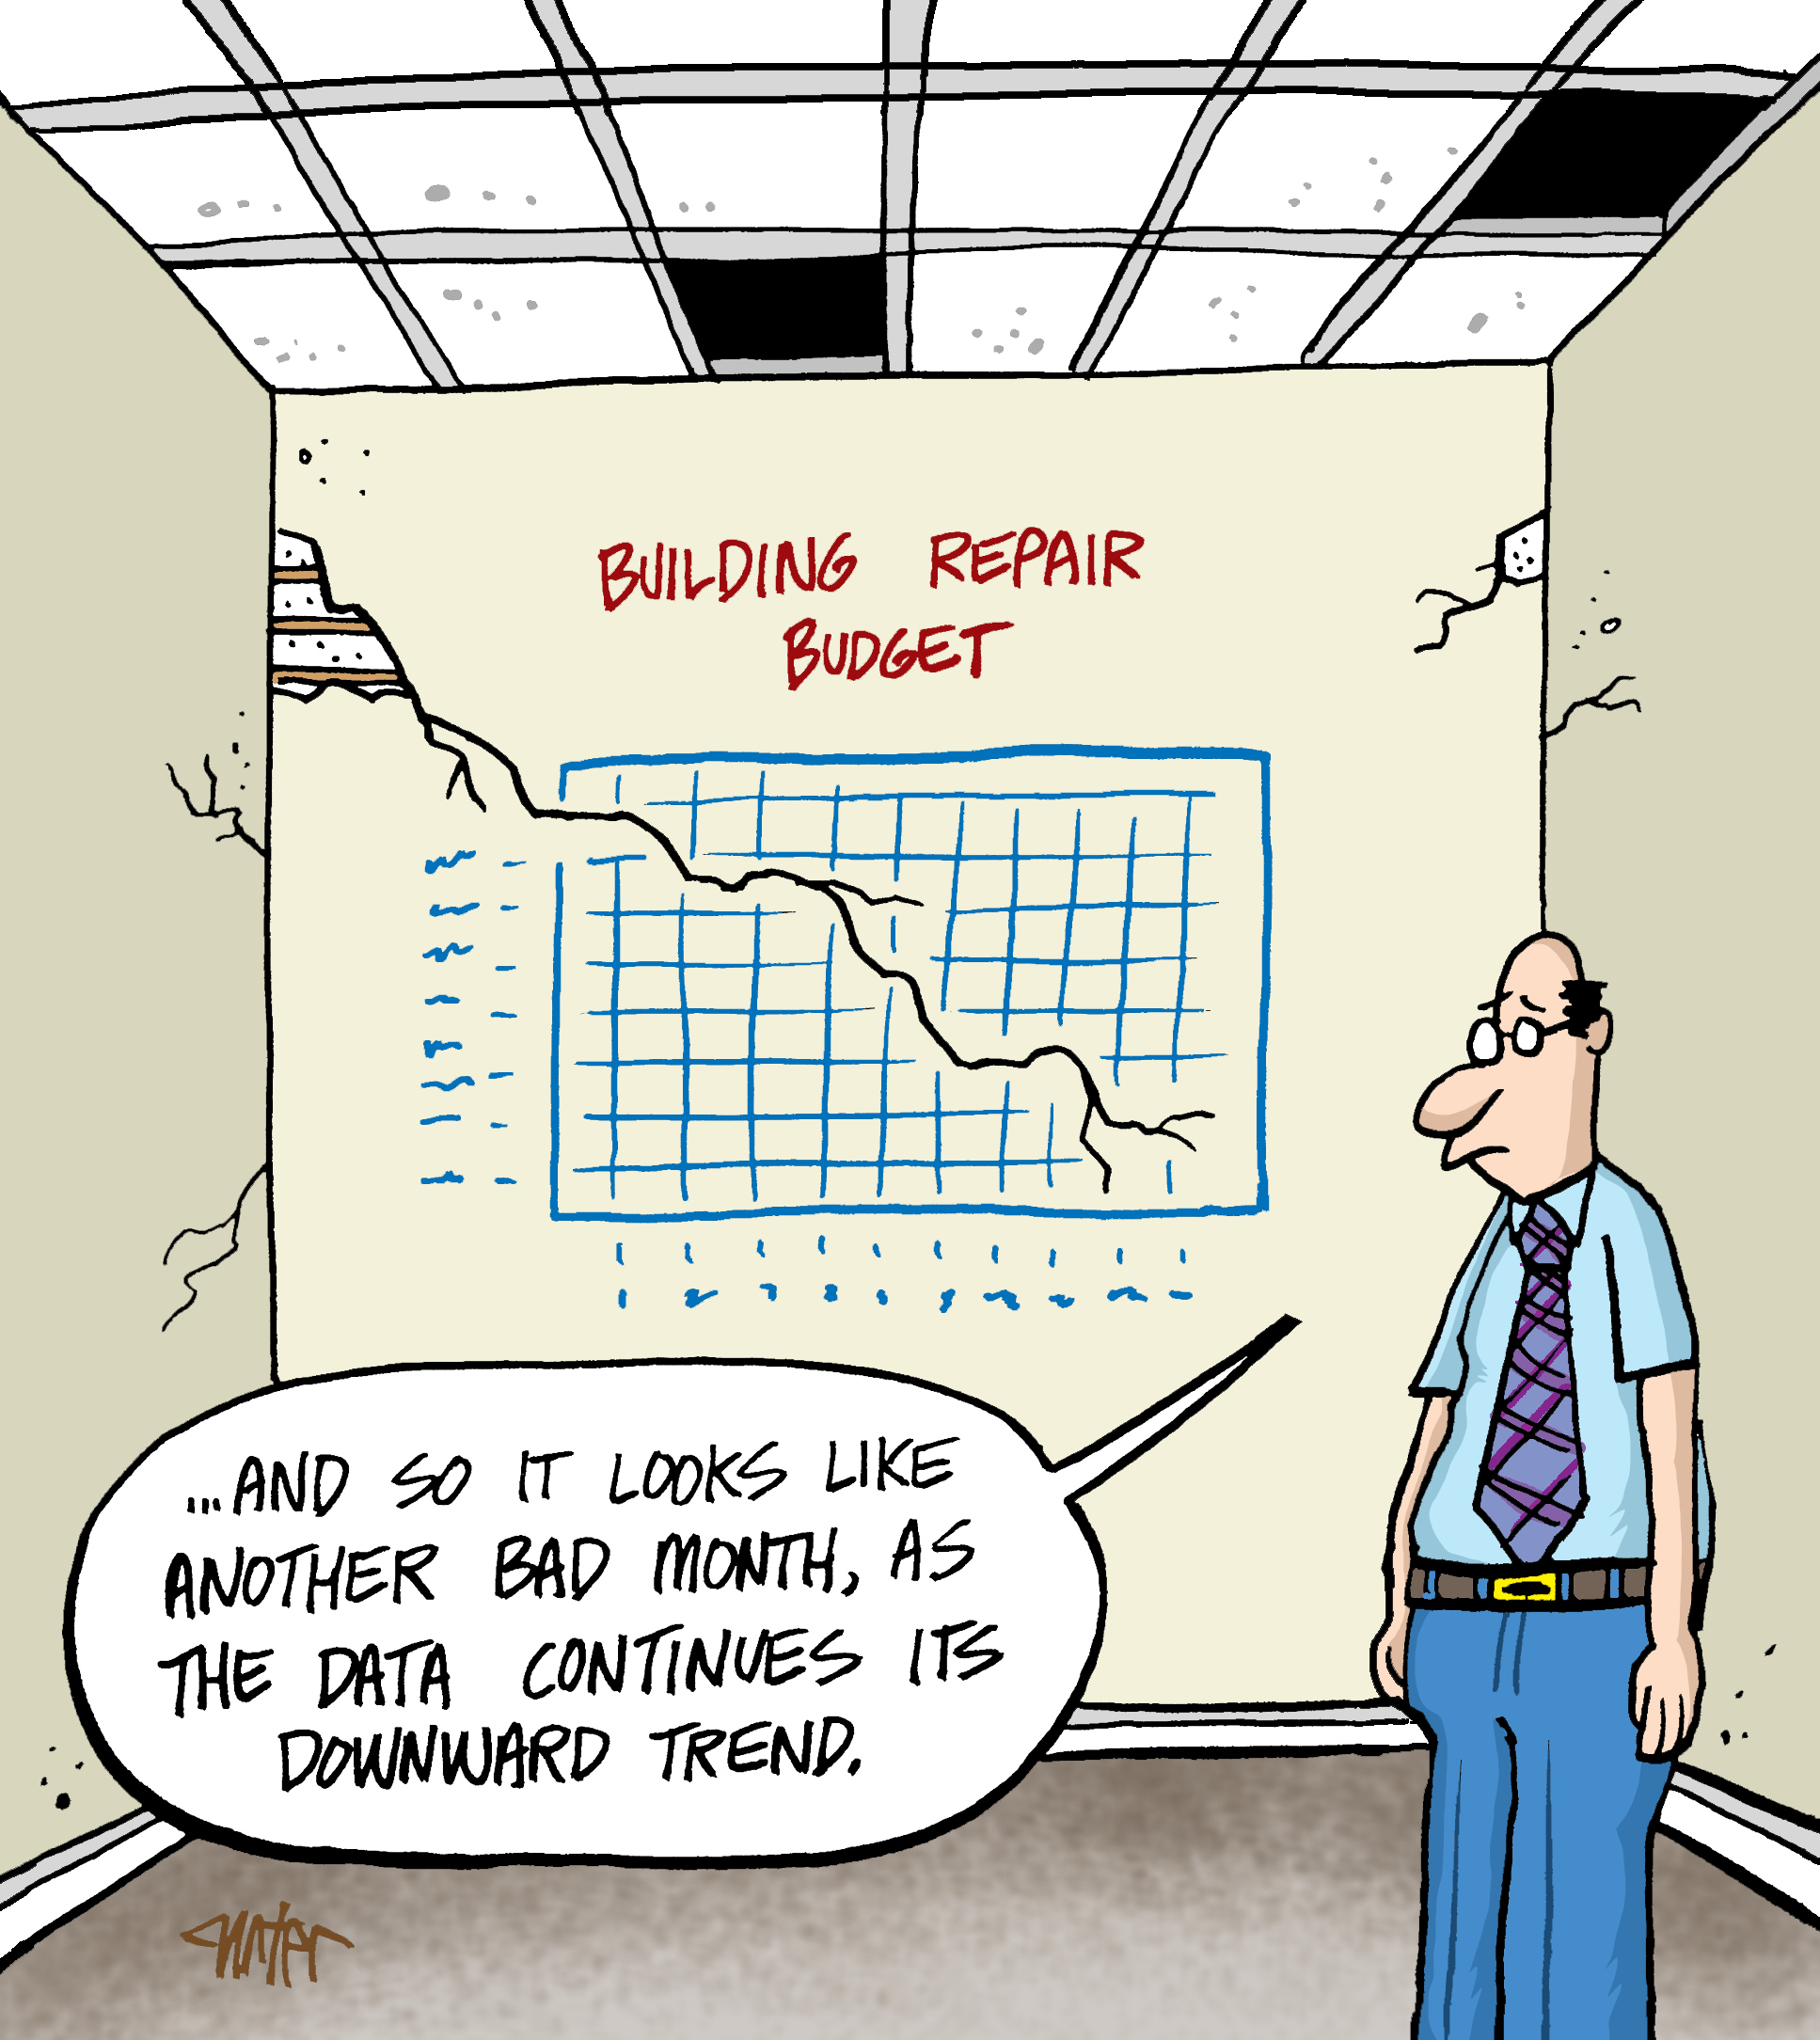 a cartoon showing a wall with a plot labeled "Building Repair Budget" The wall has a big crack in it that runs downhill through the graph making it look like that is the time plot of the budget.